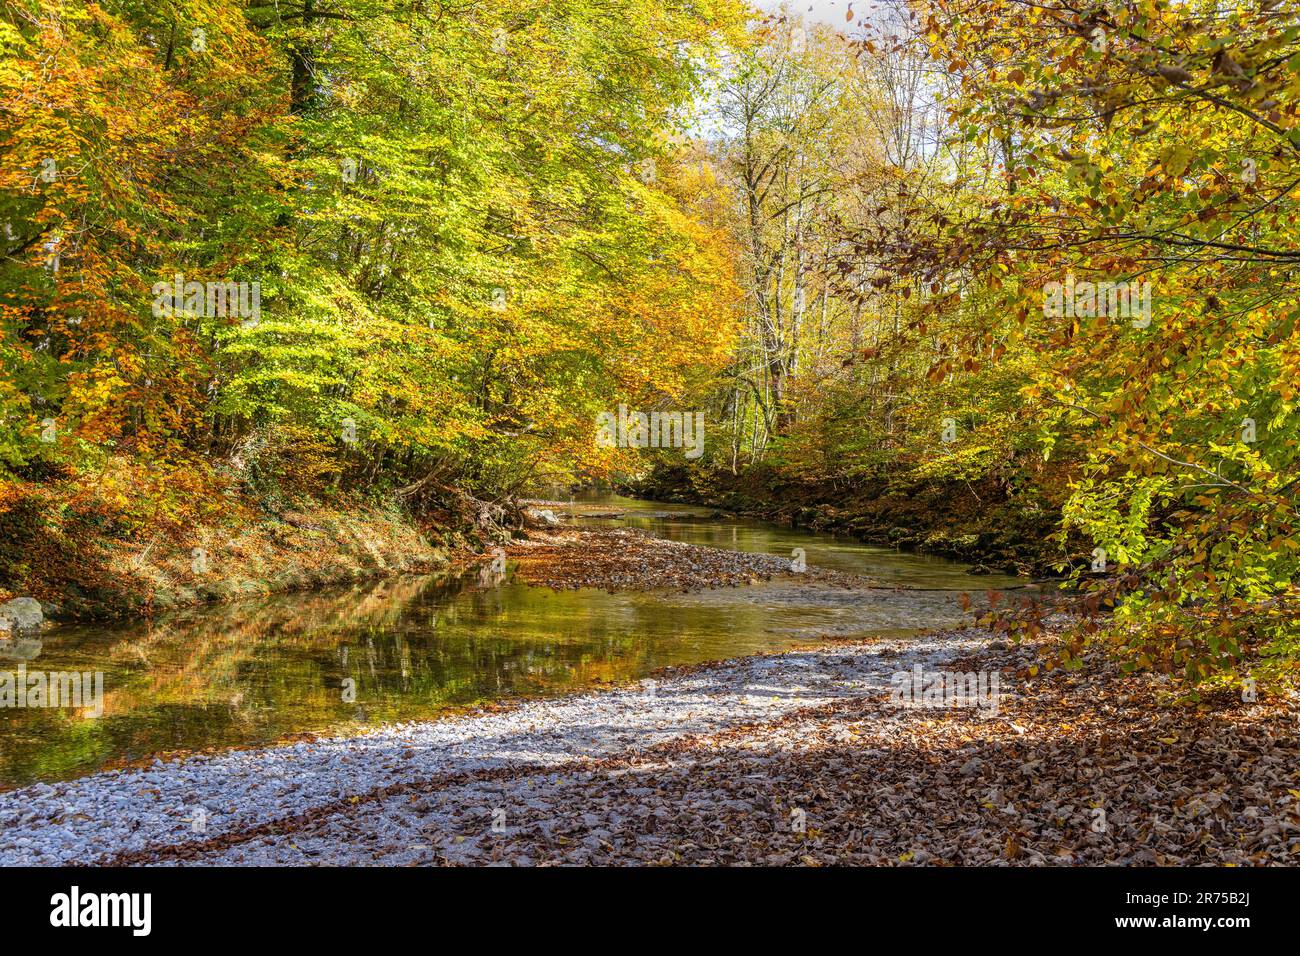 small clear river with riparian forest in autumn leaves, Germany, Bavaria, Prien Stock Photo